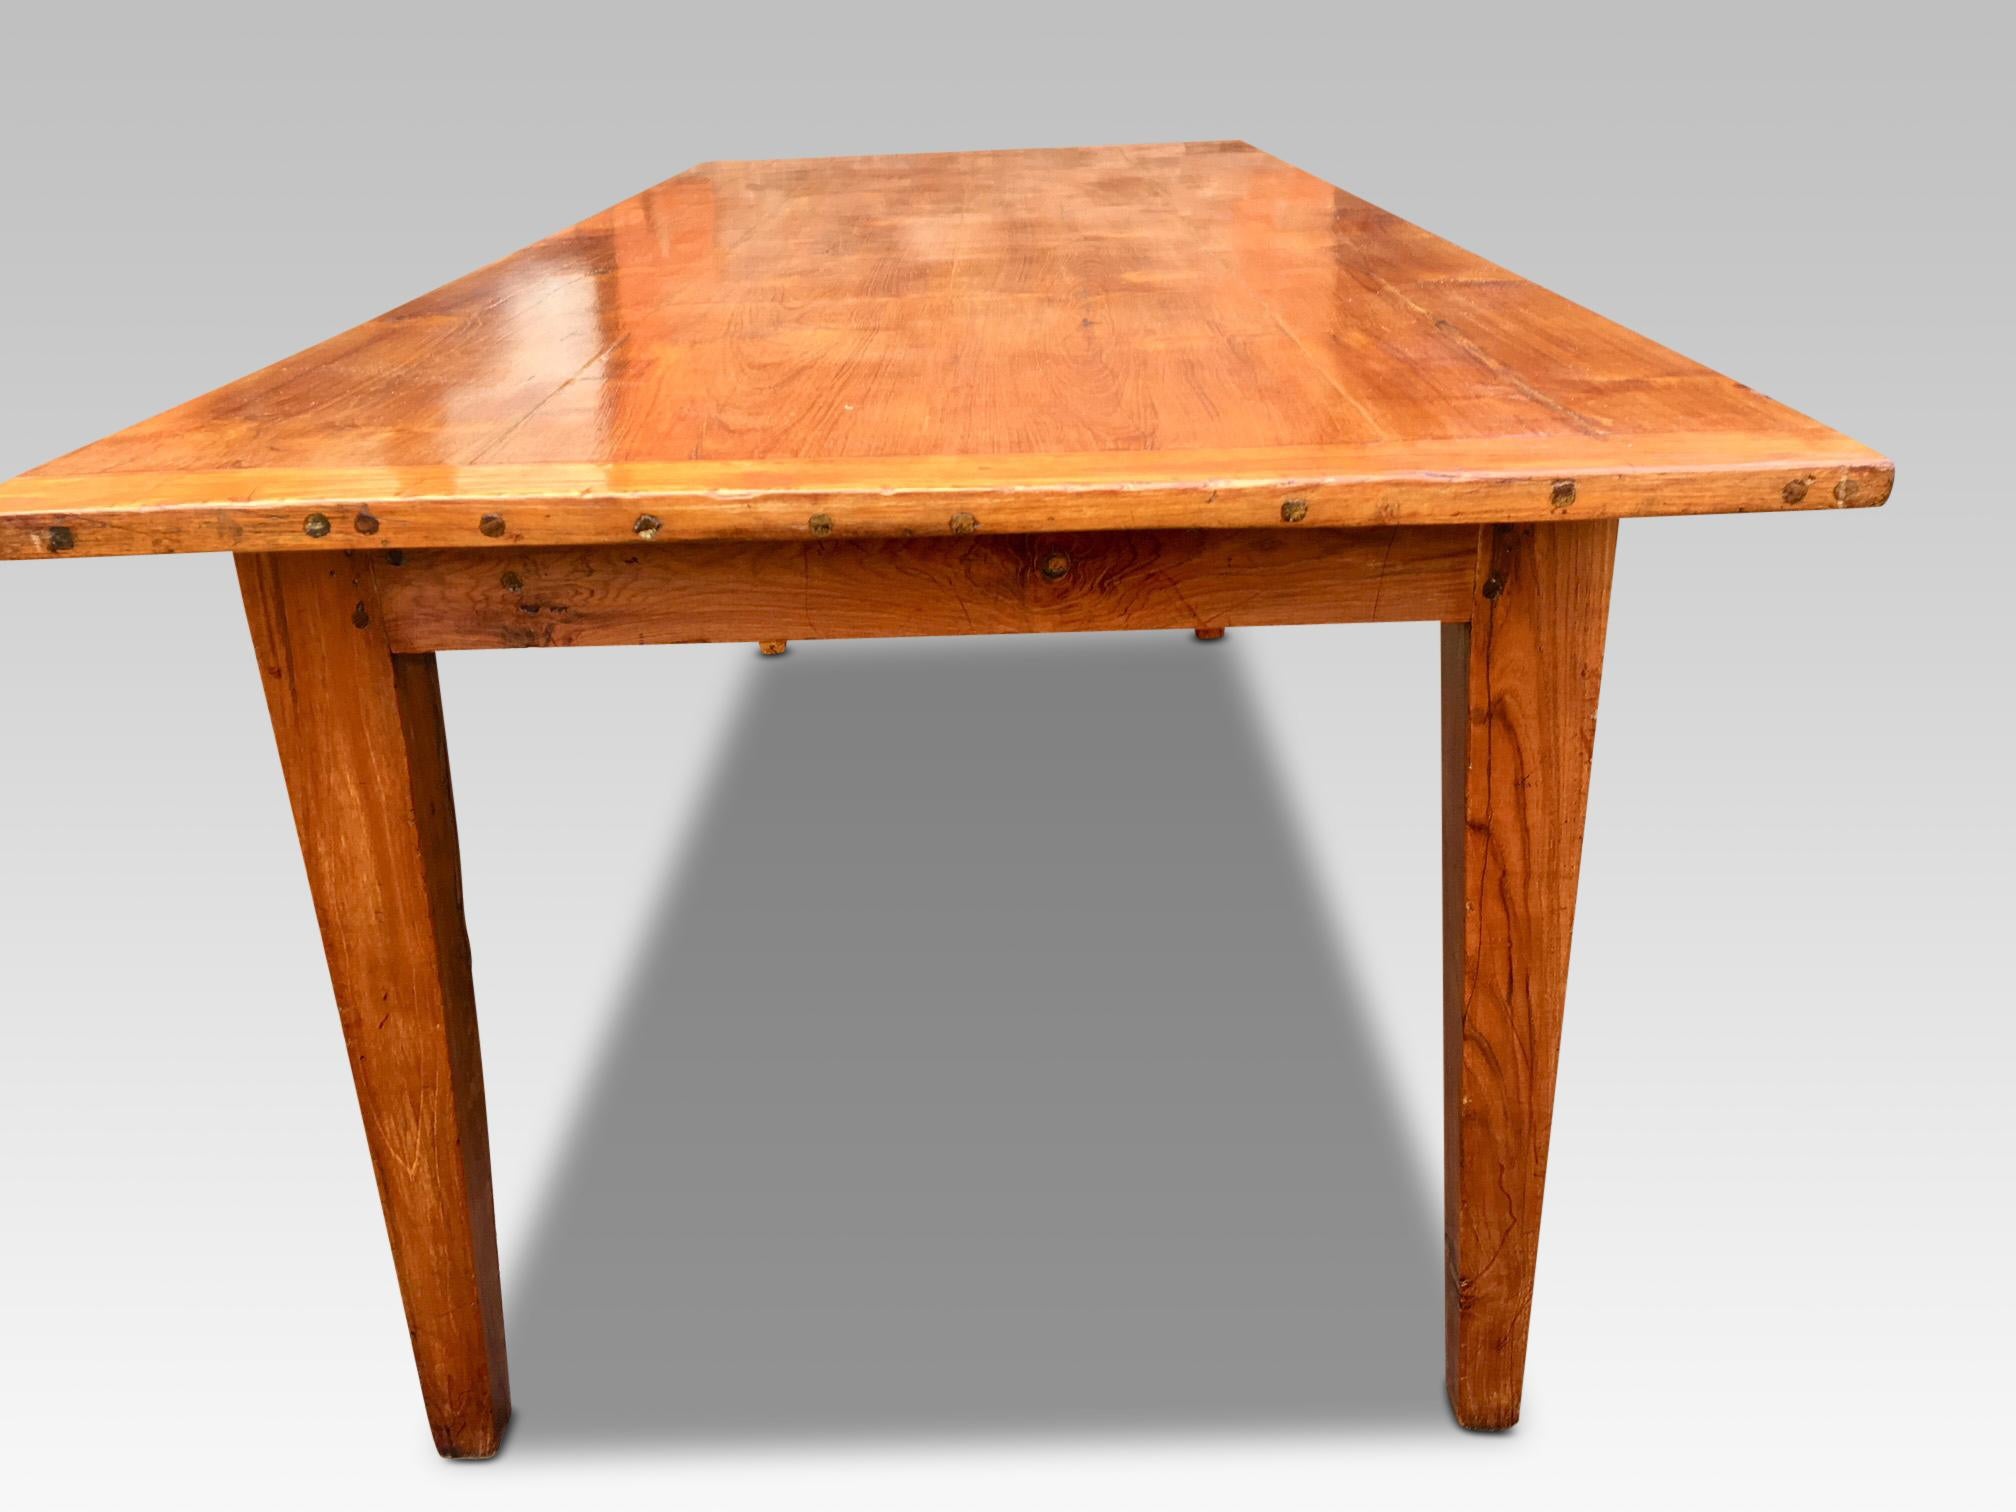 French Provincial 19th century Chestnut Farmhouse Table. French C 1880